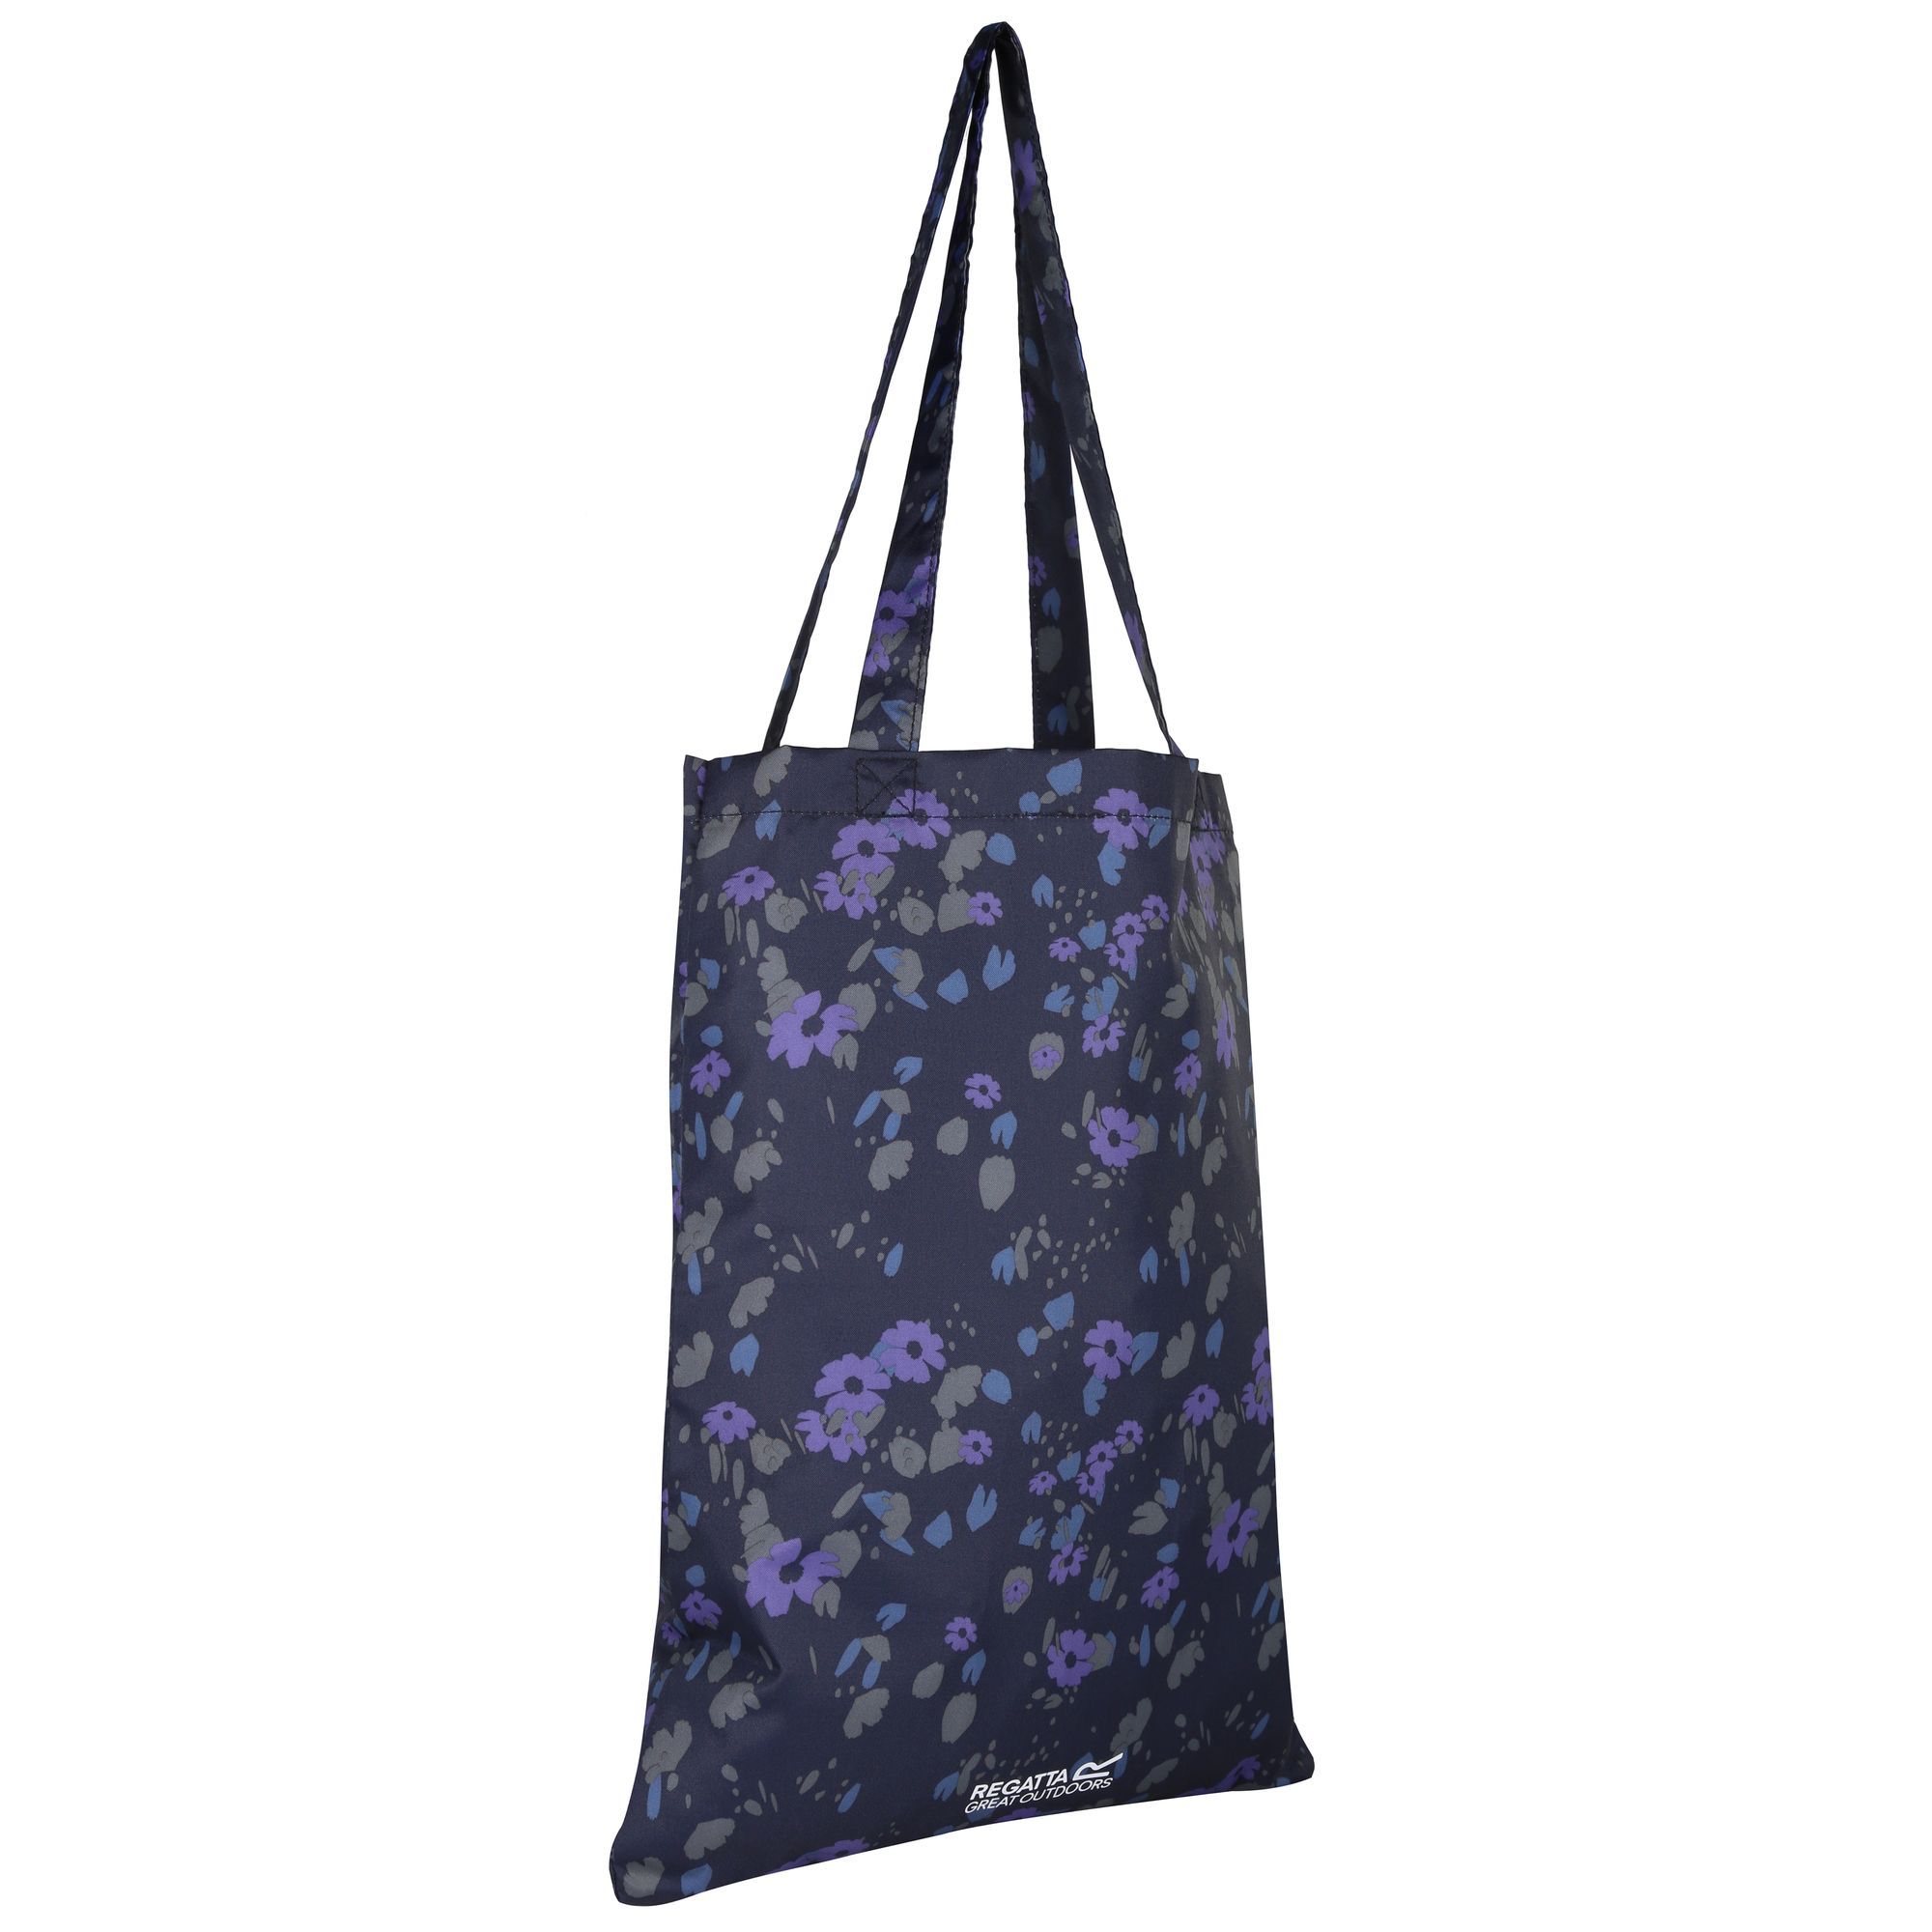 100% Polyester. Reusable. Tote bag packs away into small storage bag. Karabiner included. 43 x 33cm - 8L.